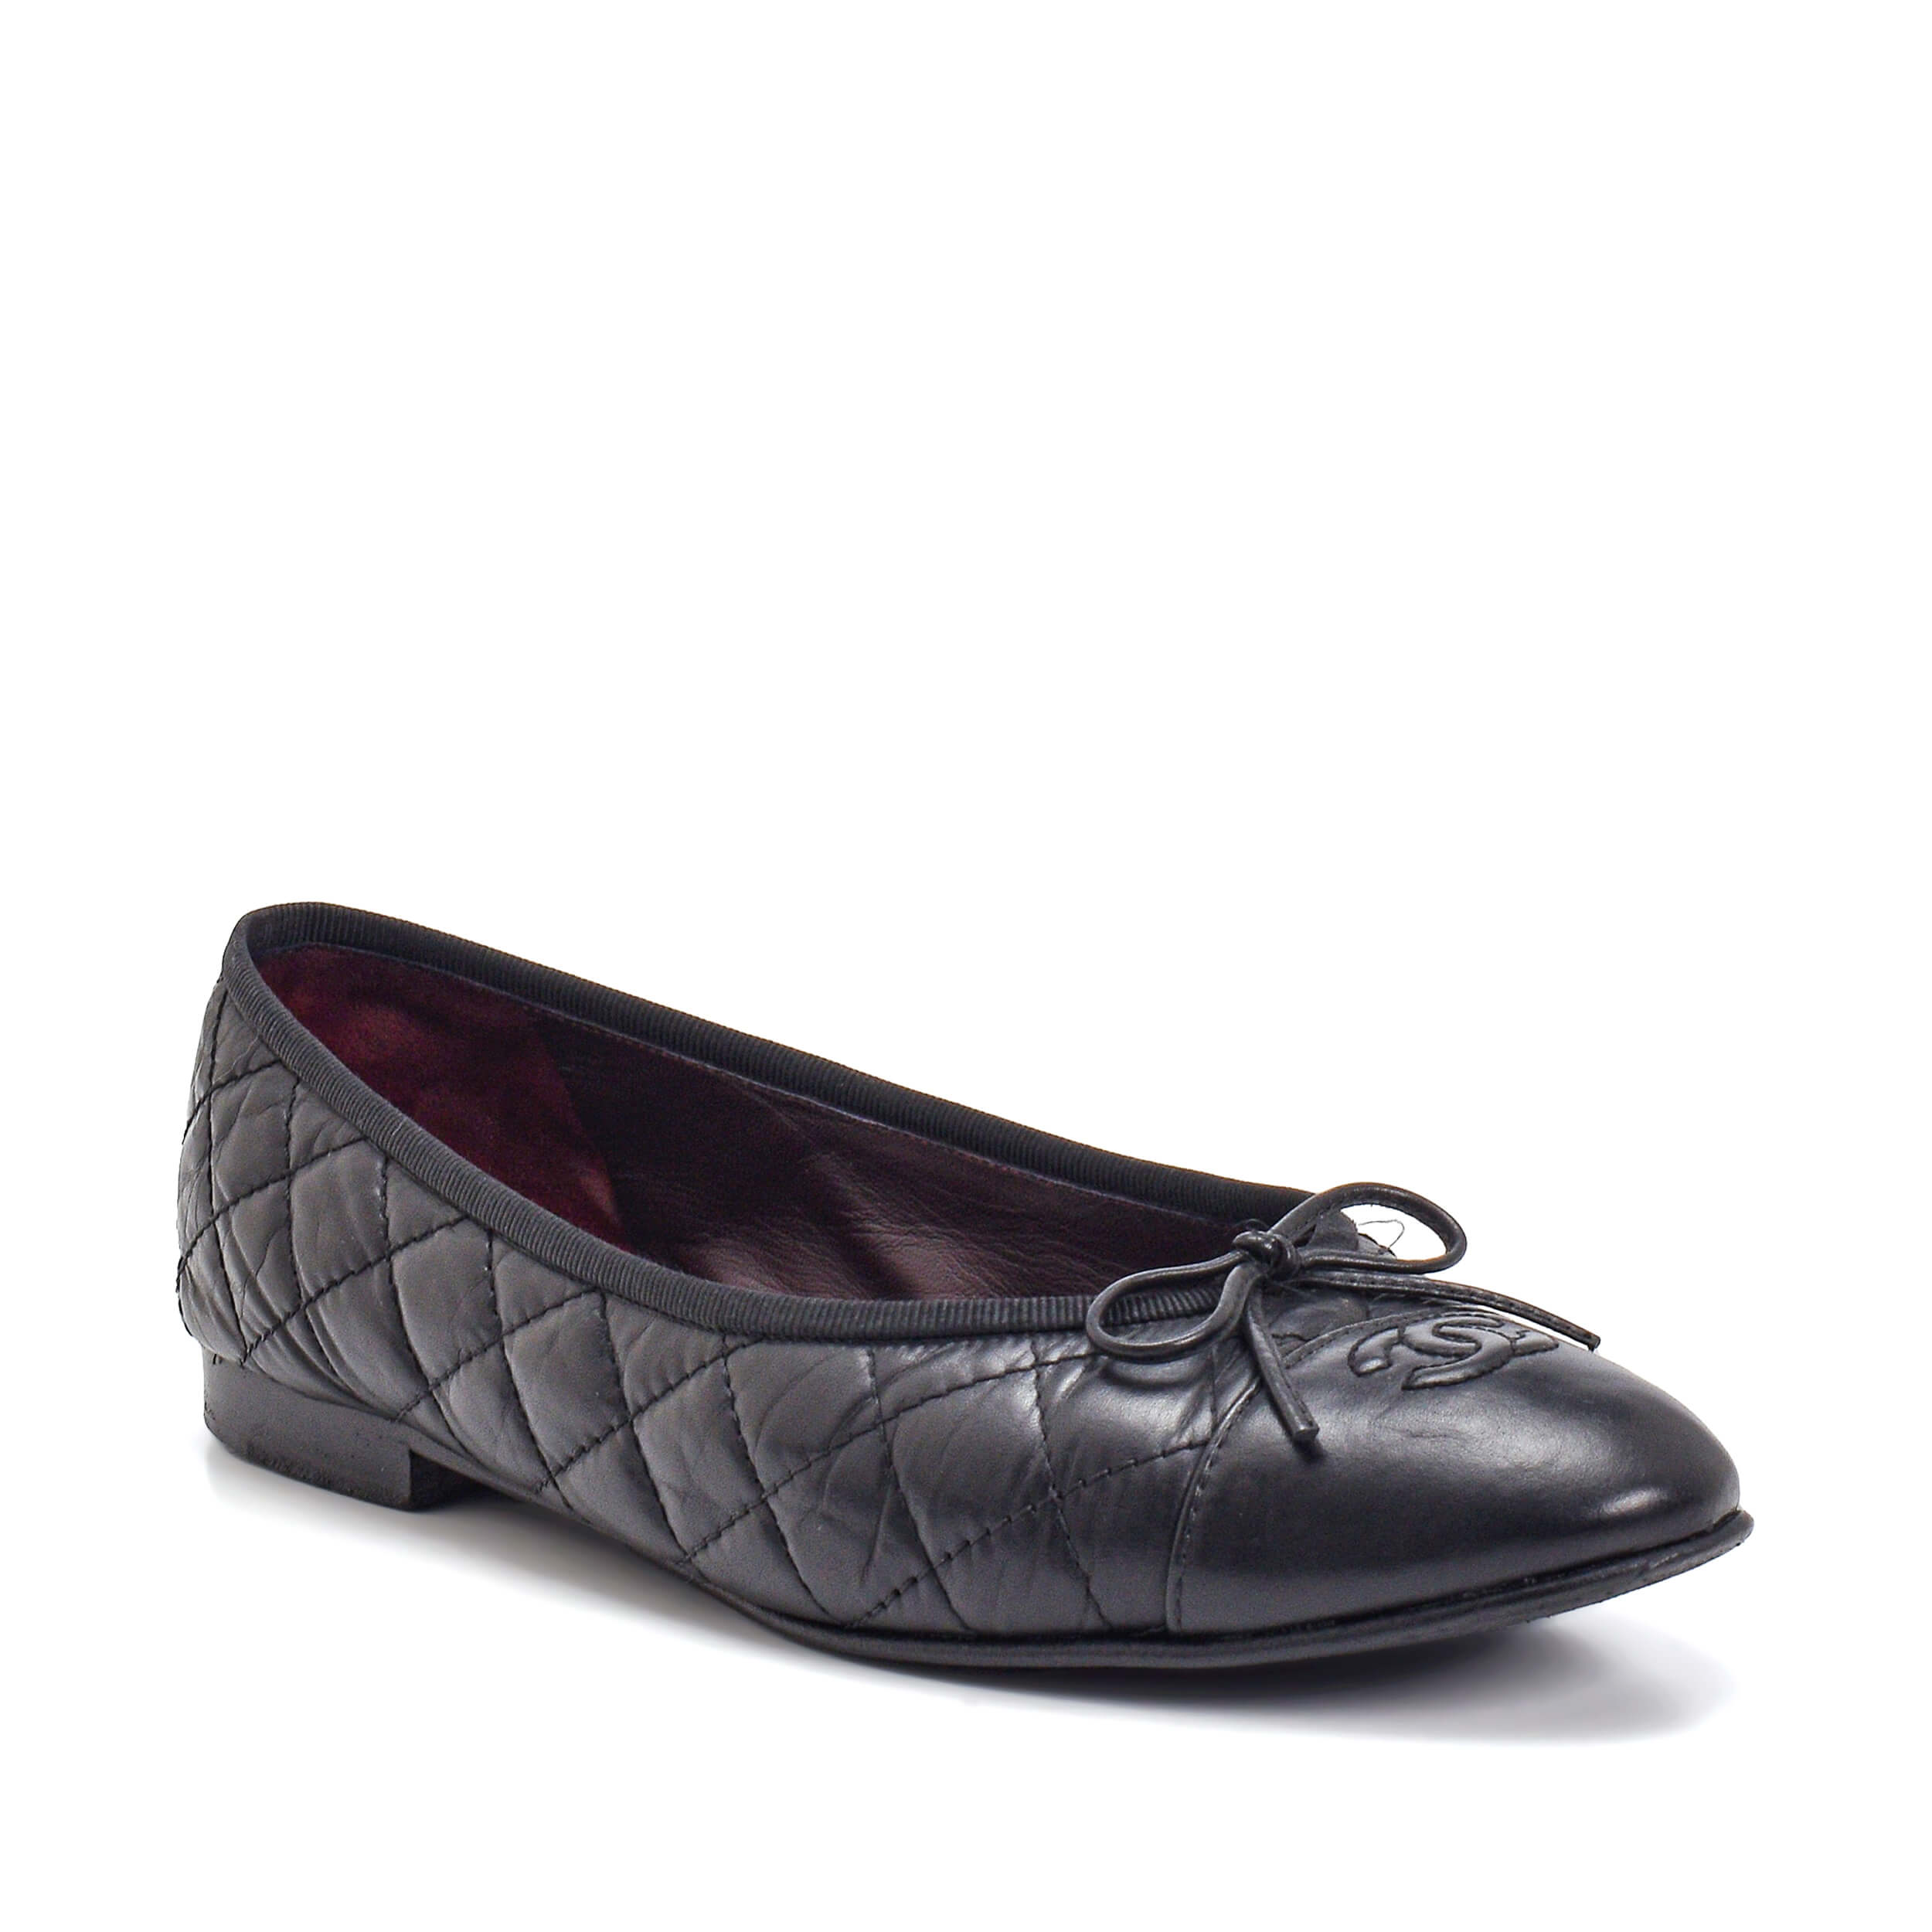 Chanel - Black CC Quilted Flat Ballerina Shoes